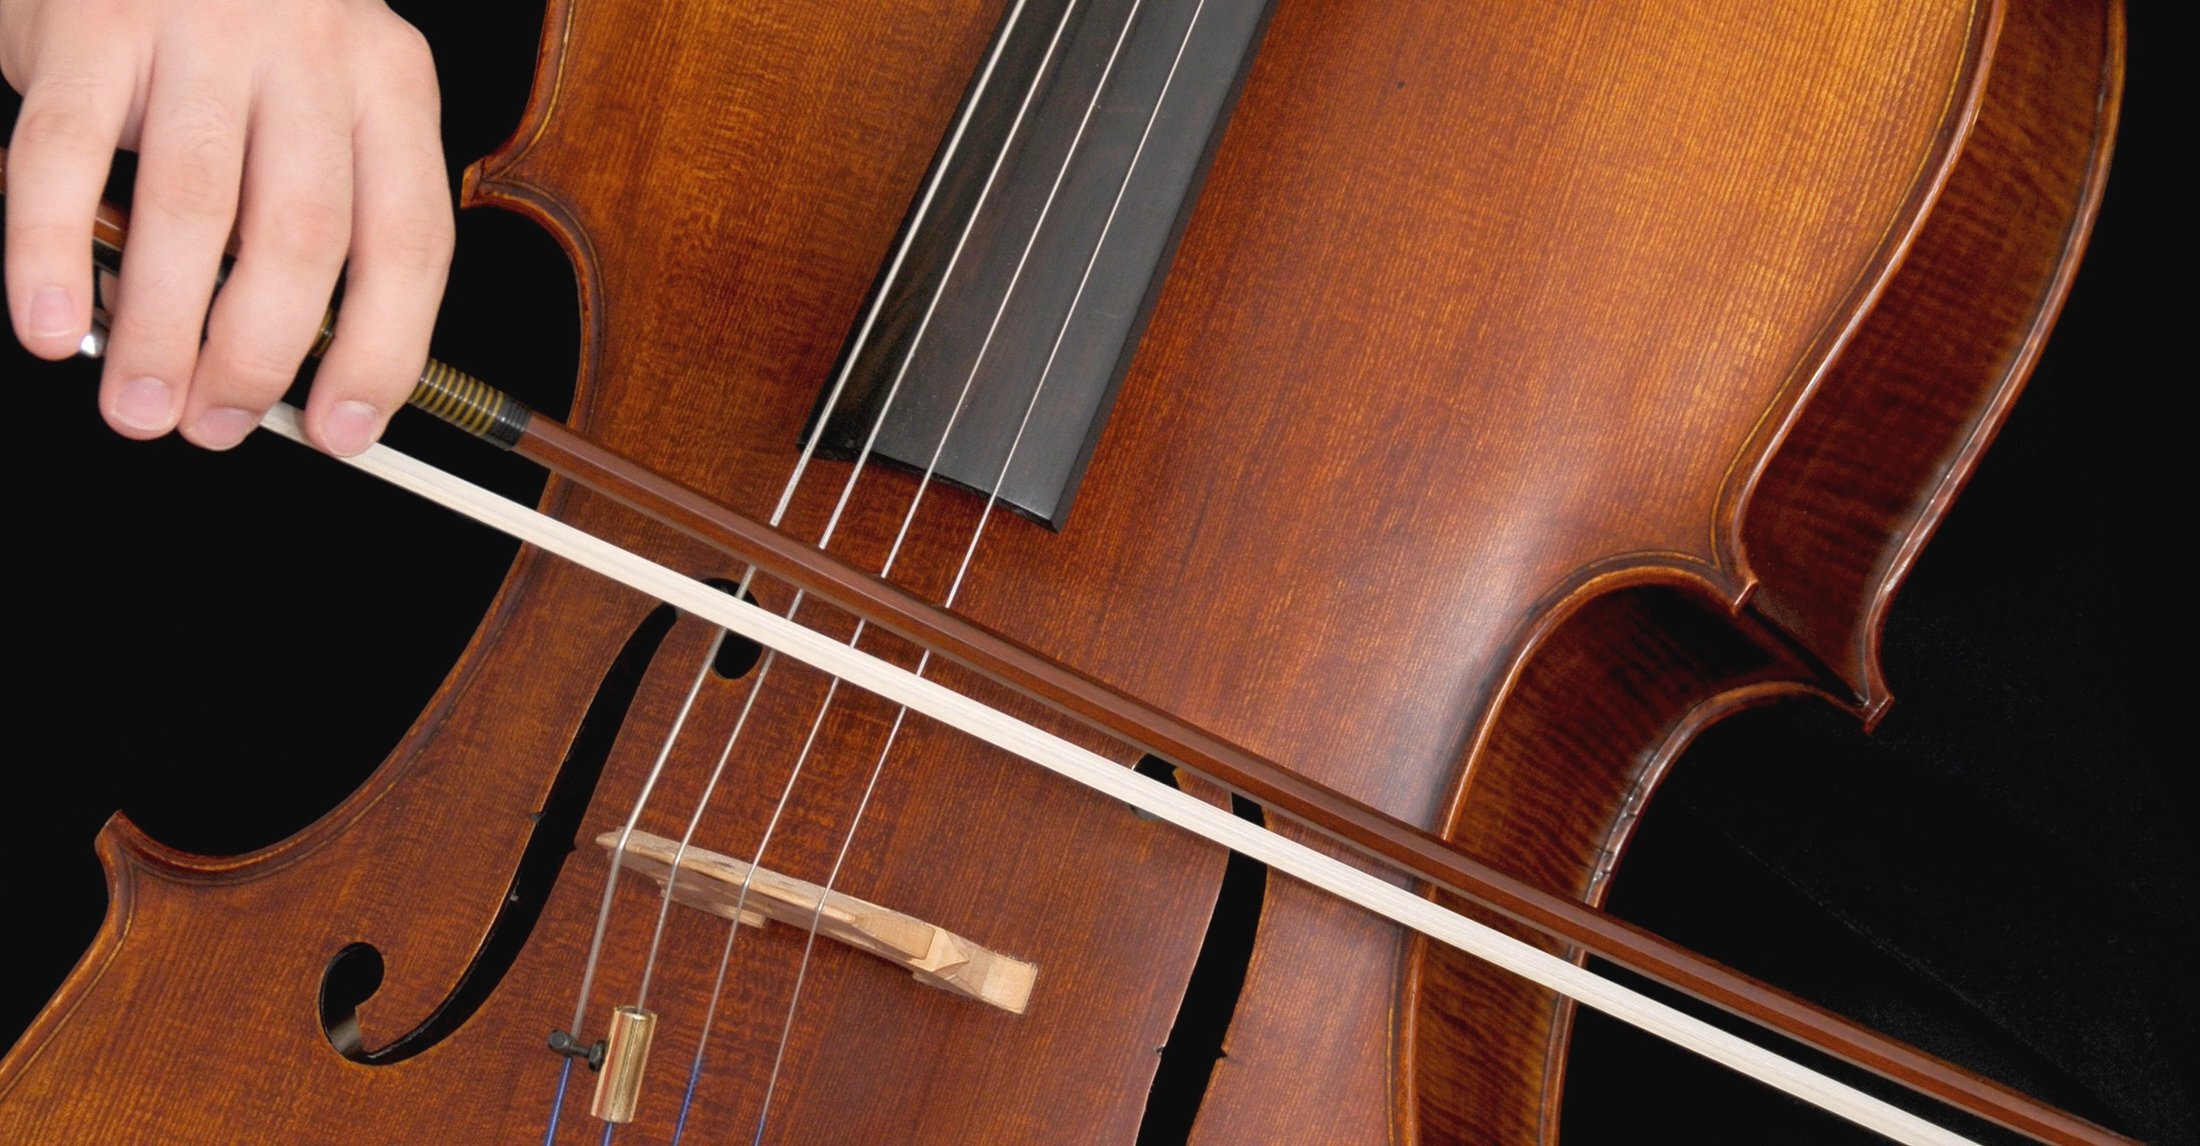 Violoncello: French Bow, The Bridge, Bass Point, So-Called "Catgut" Strings. 2200x1150 HD Wallpaper.